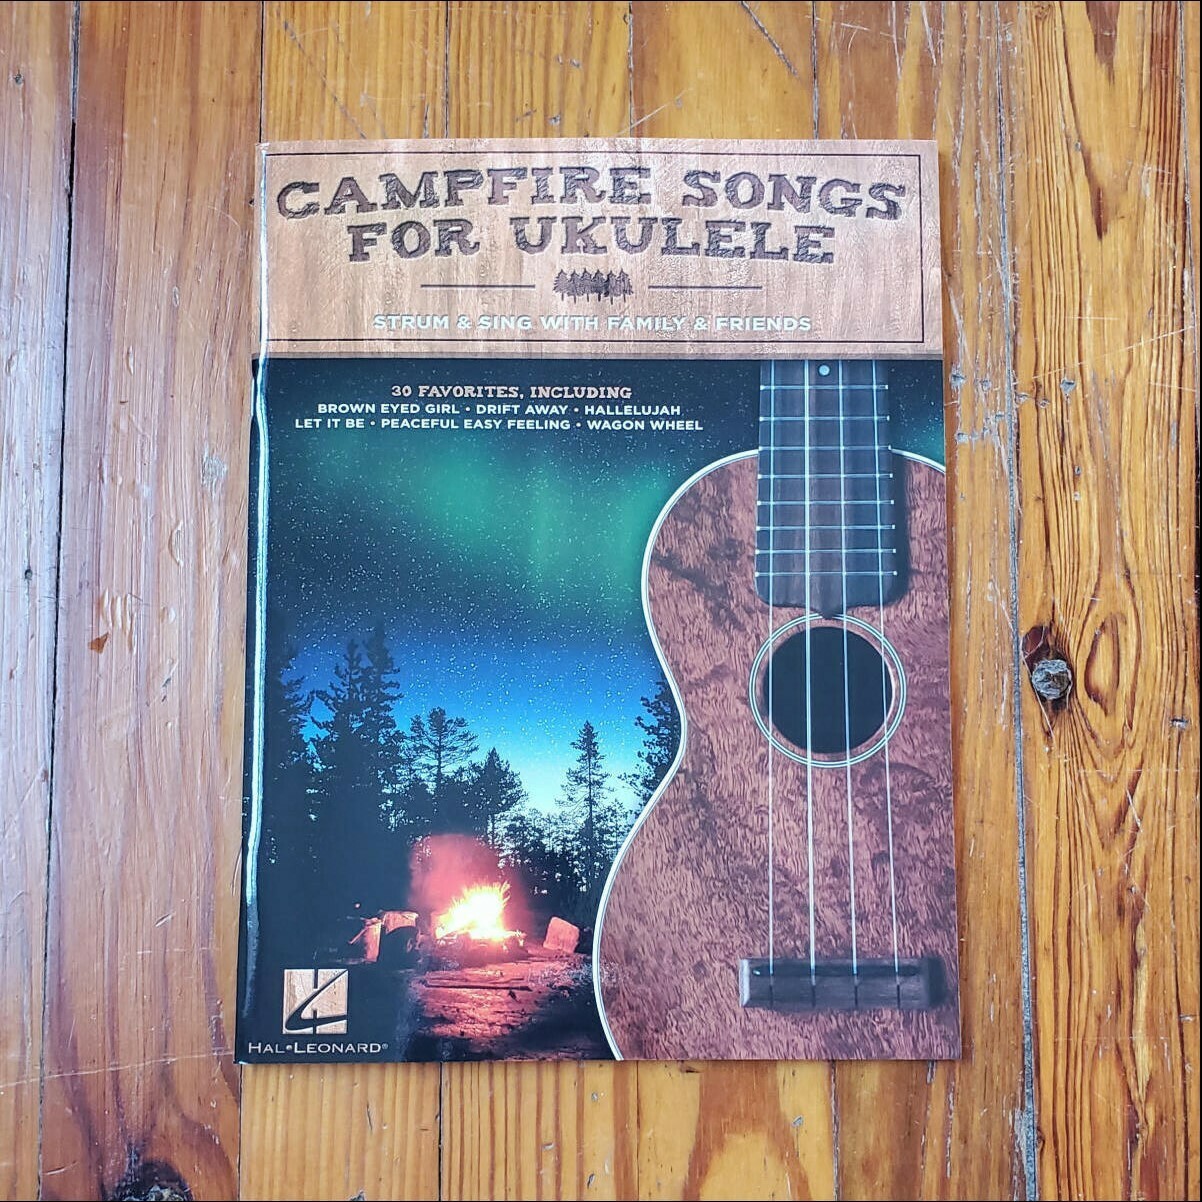 HL Campfire Songs for Ukulele by: Various Authors